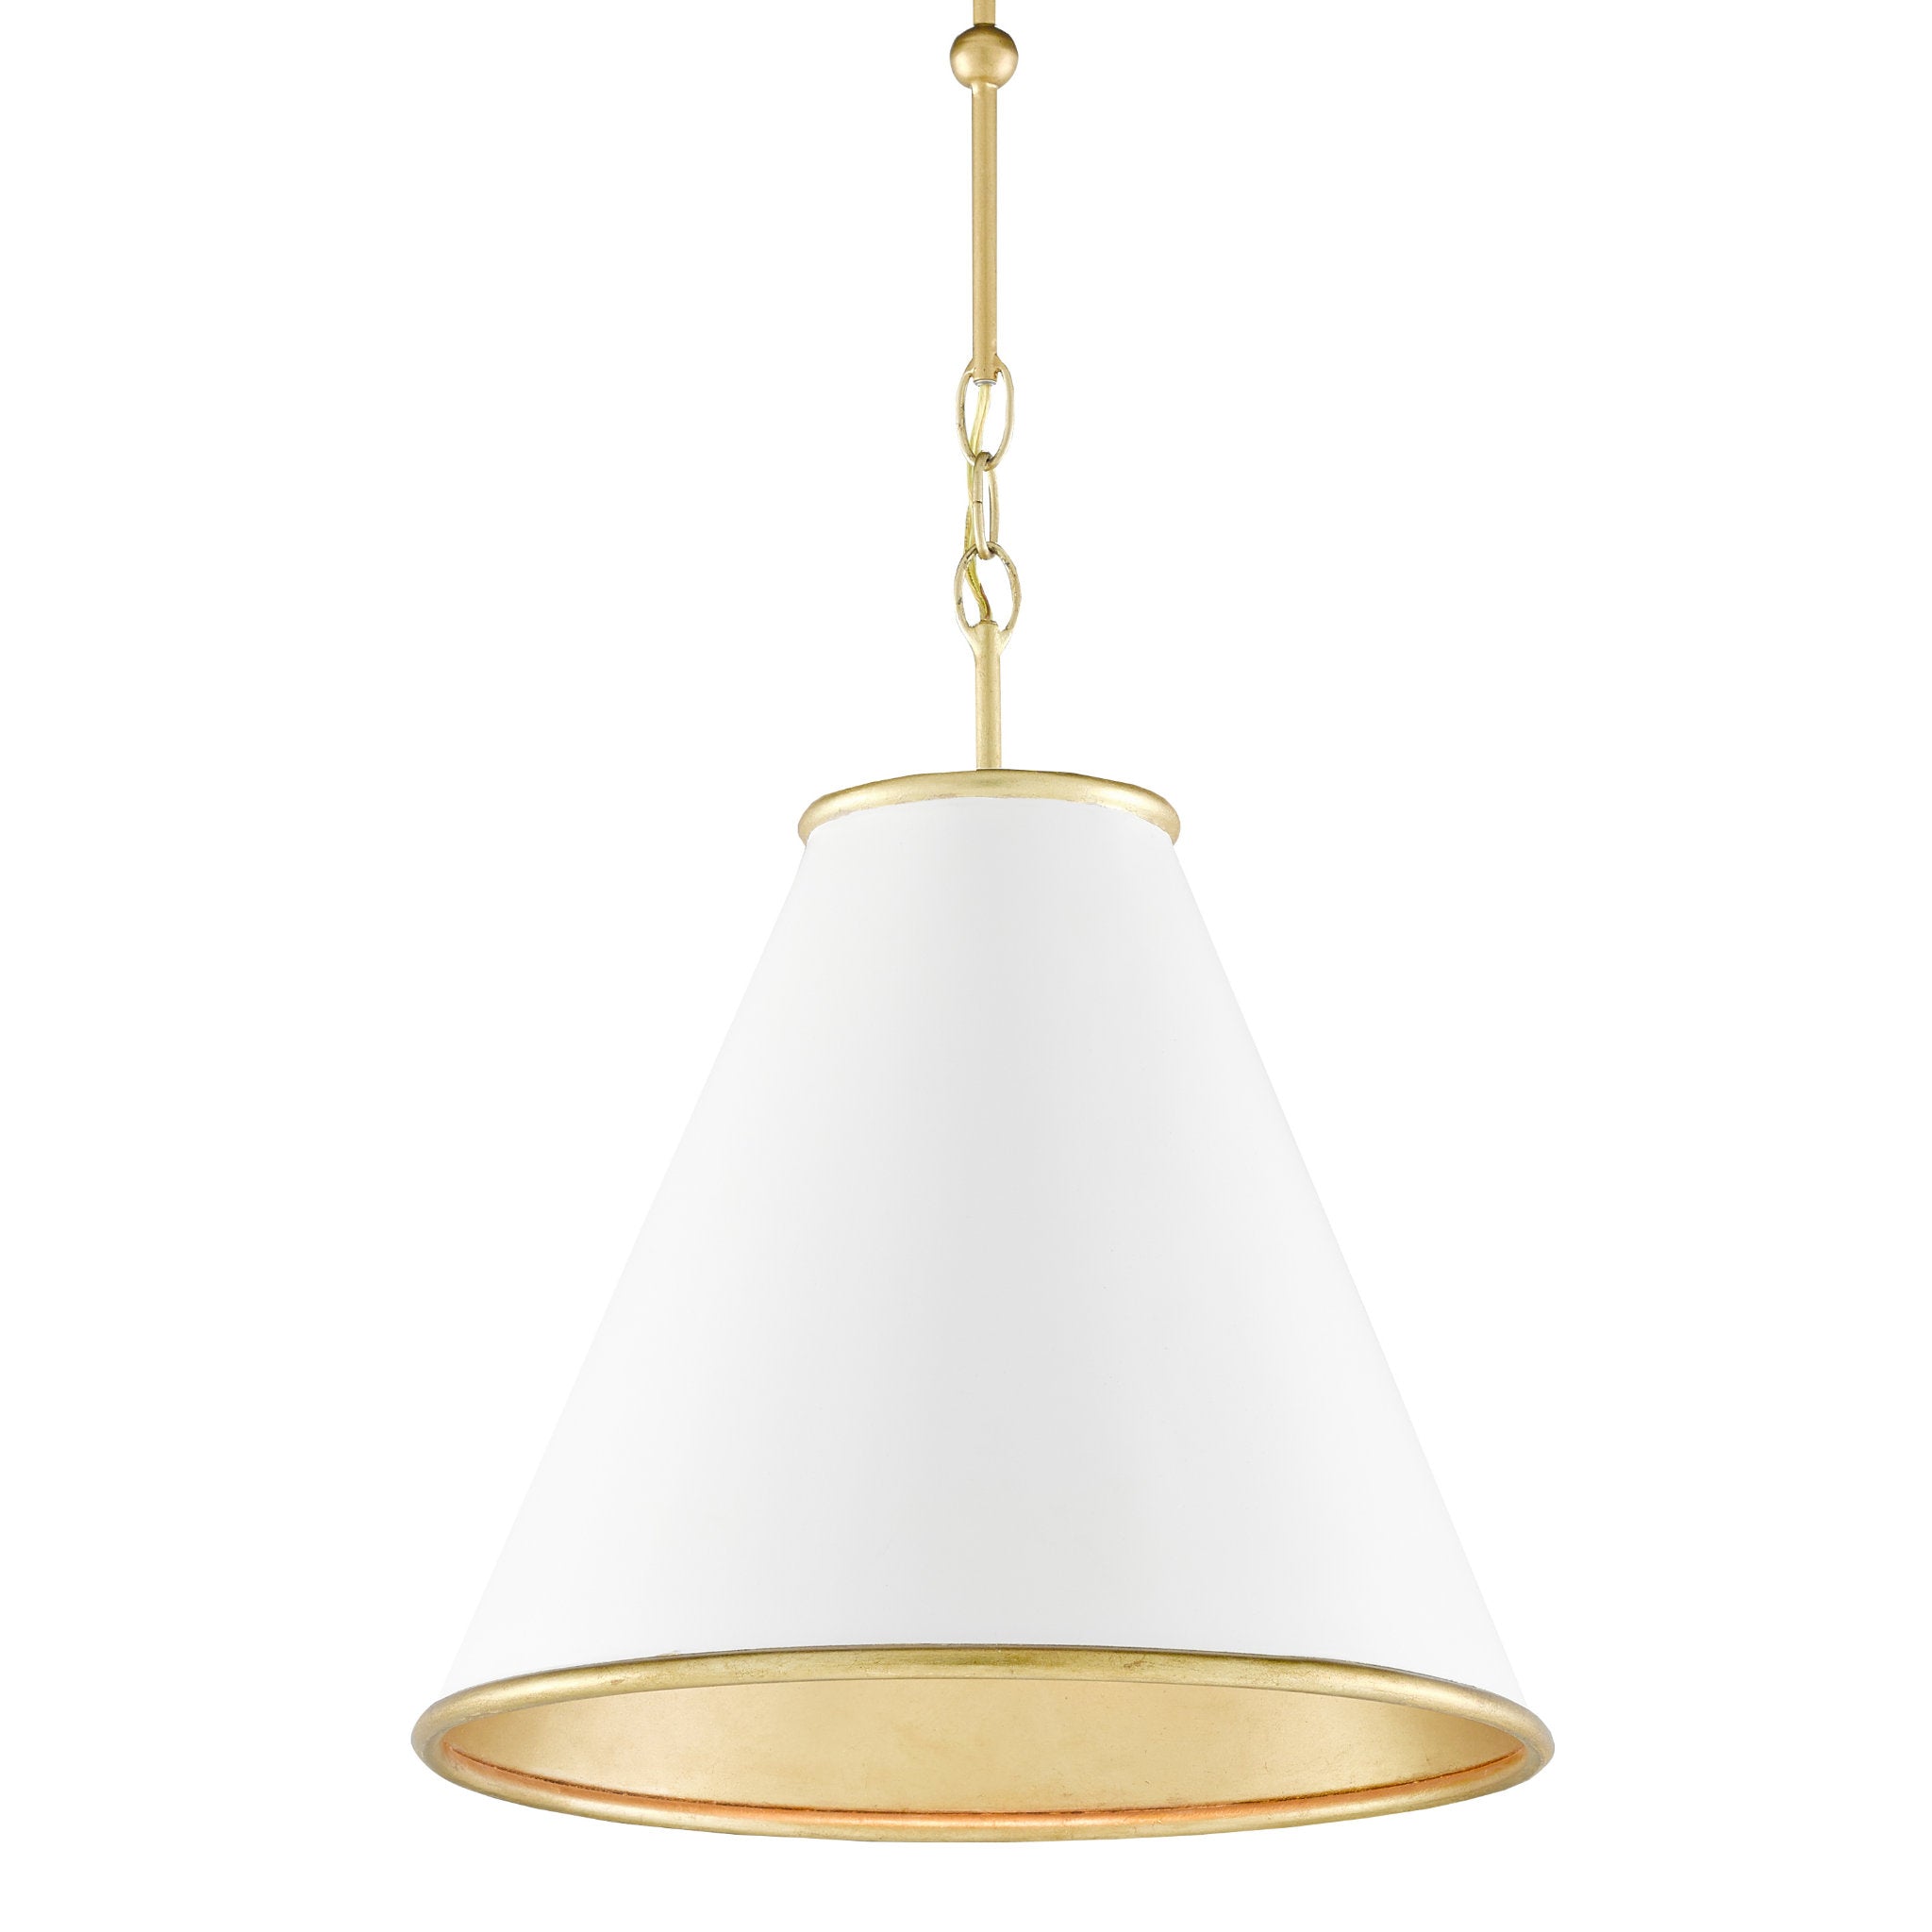 Pierrepont Small White Pendant - Painted Gesso White/Contemporary Gold Leaf/Painted Gold